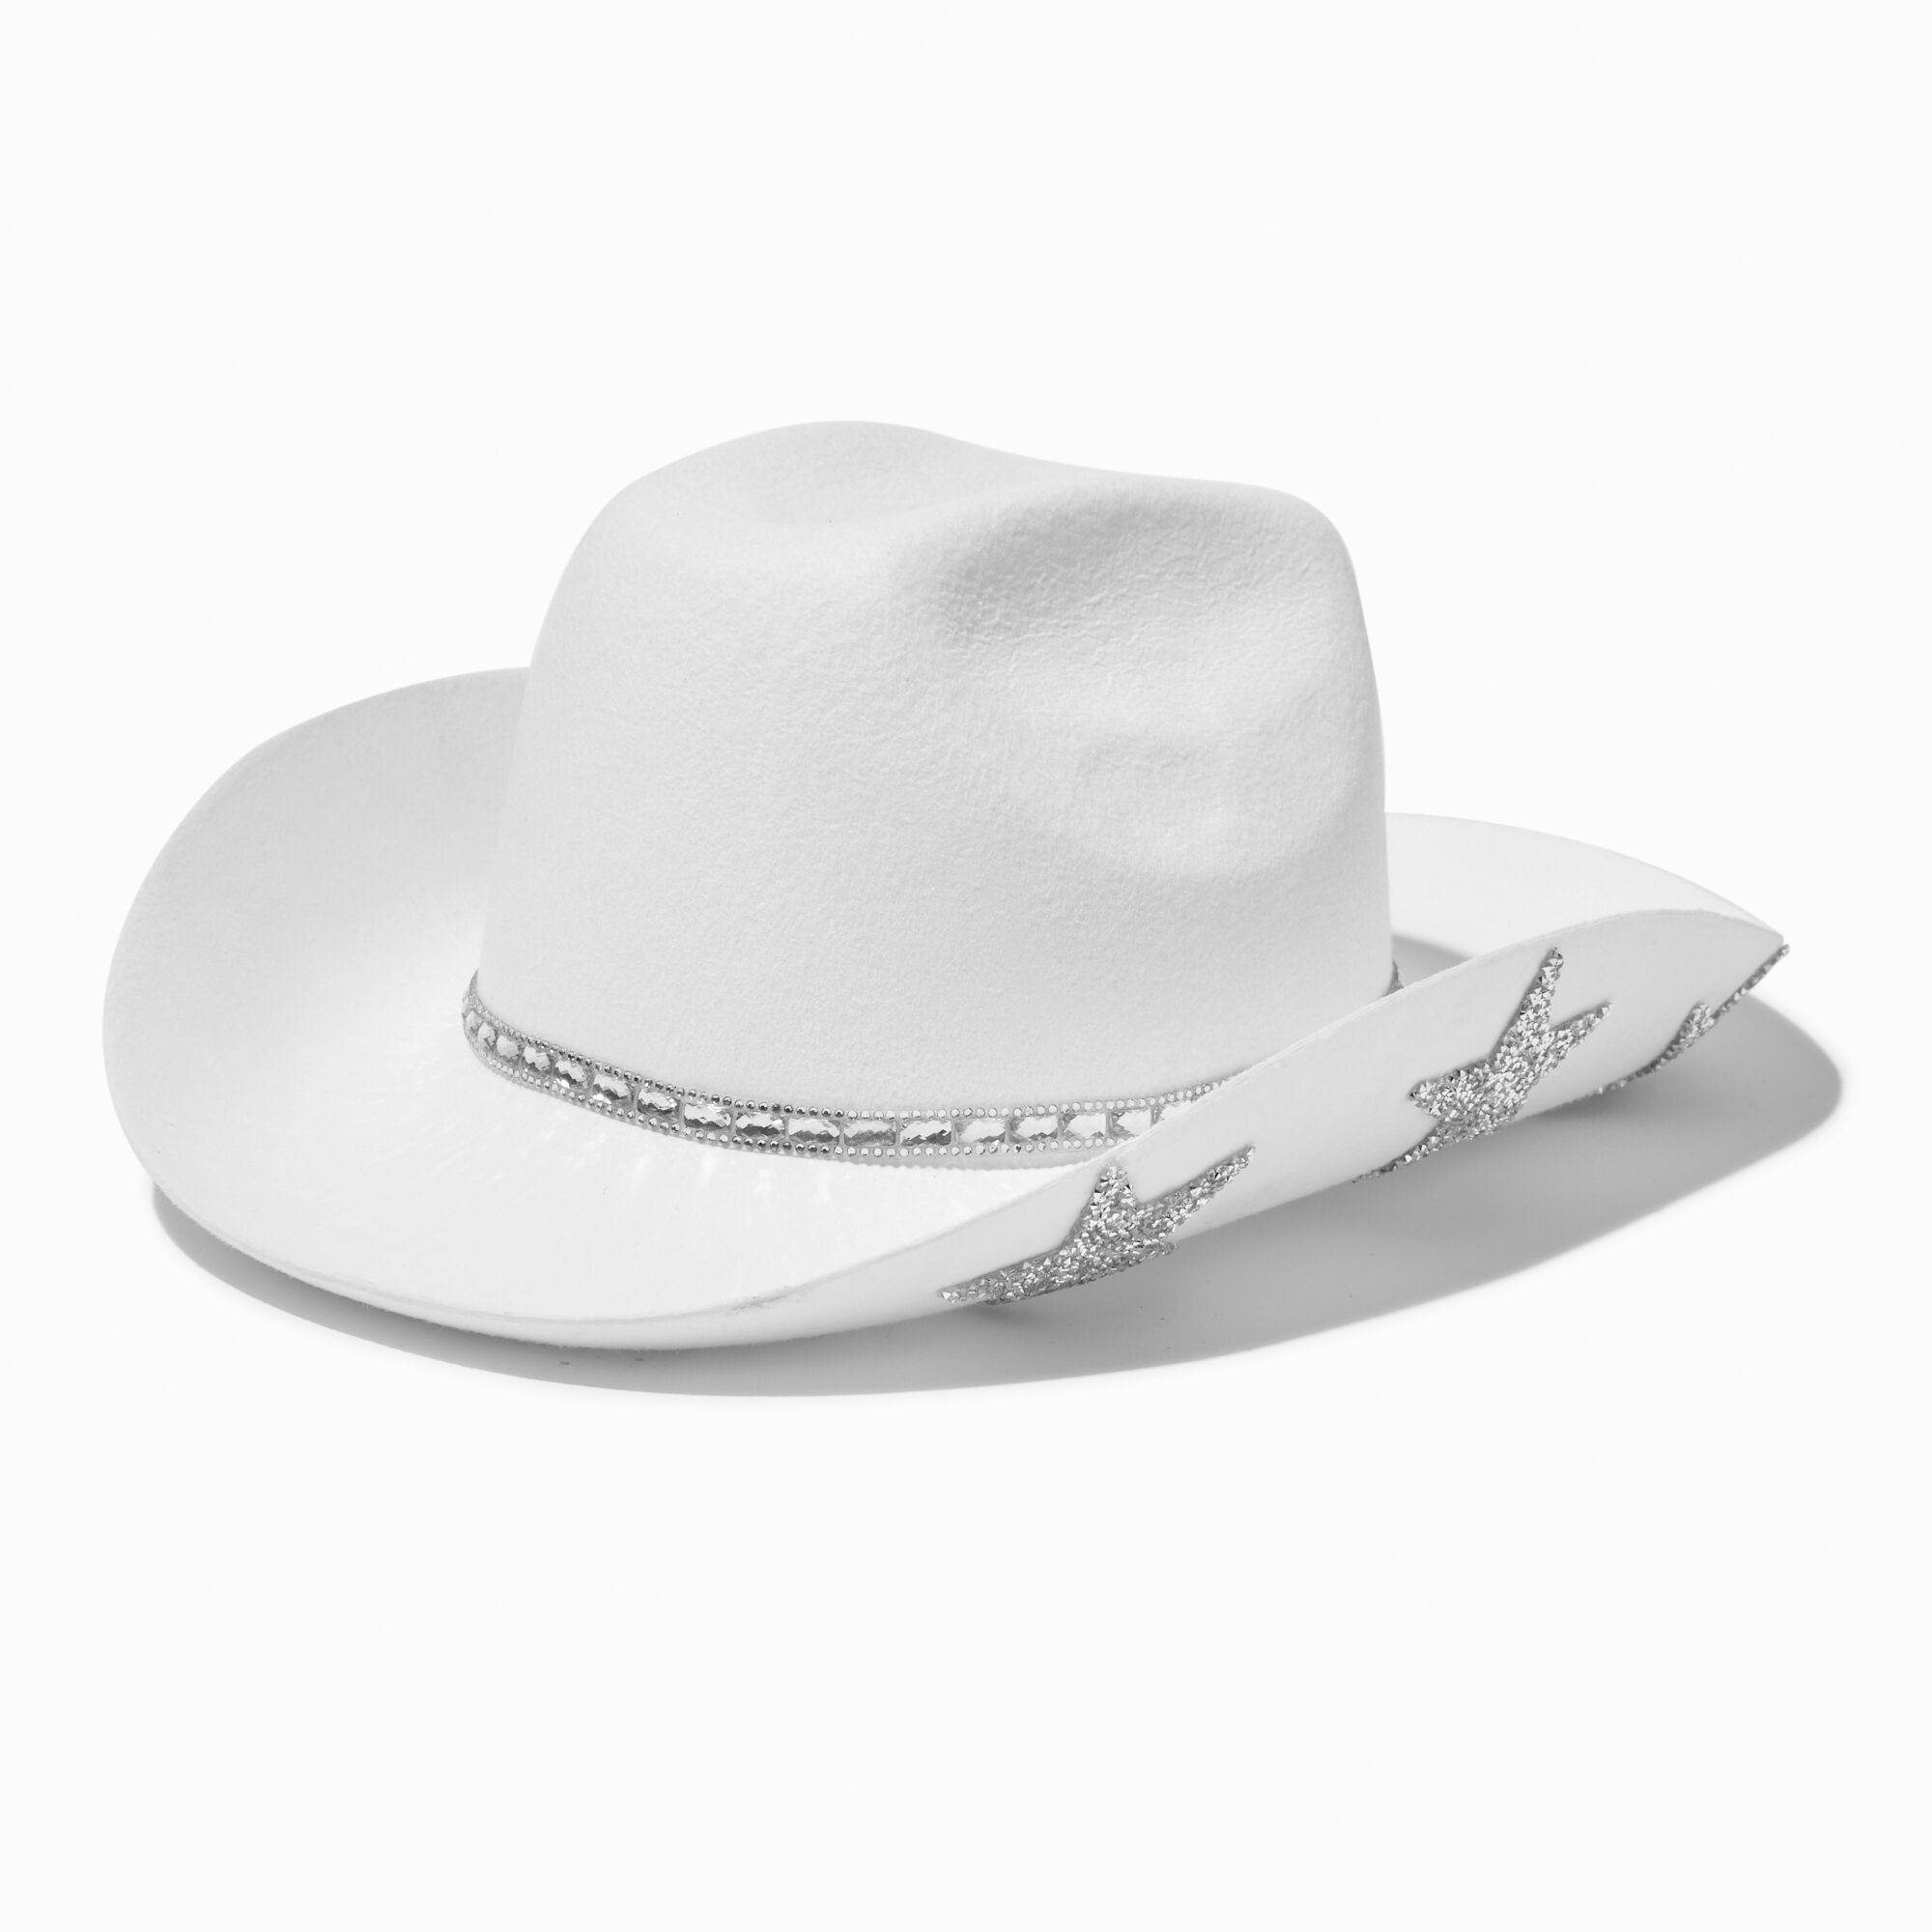 View Claires Silver Stars Cowboy Hat White information